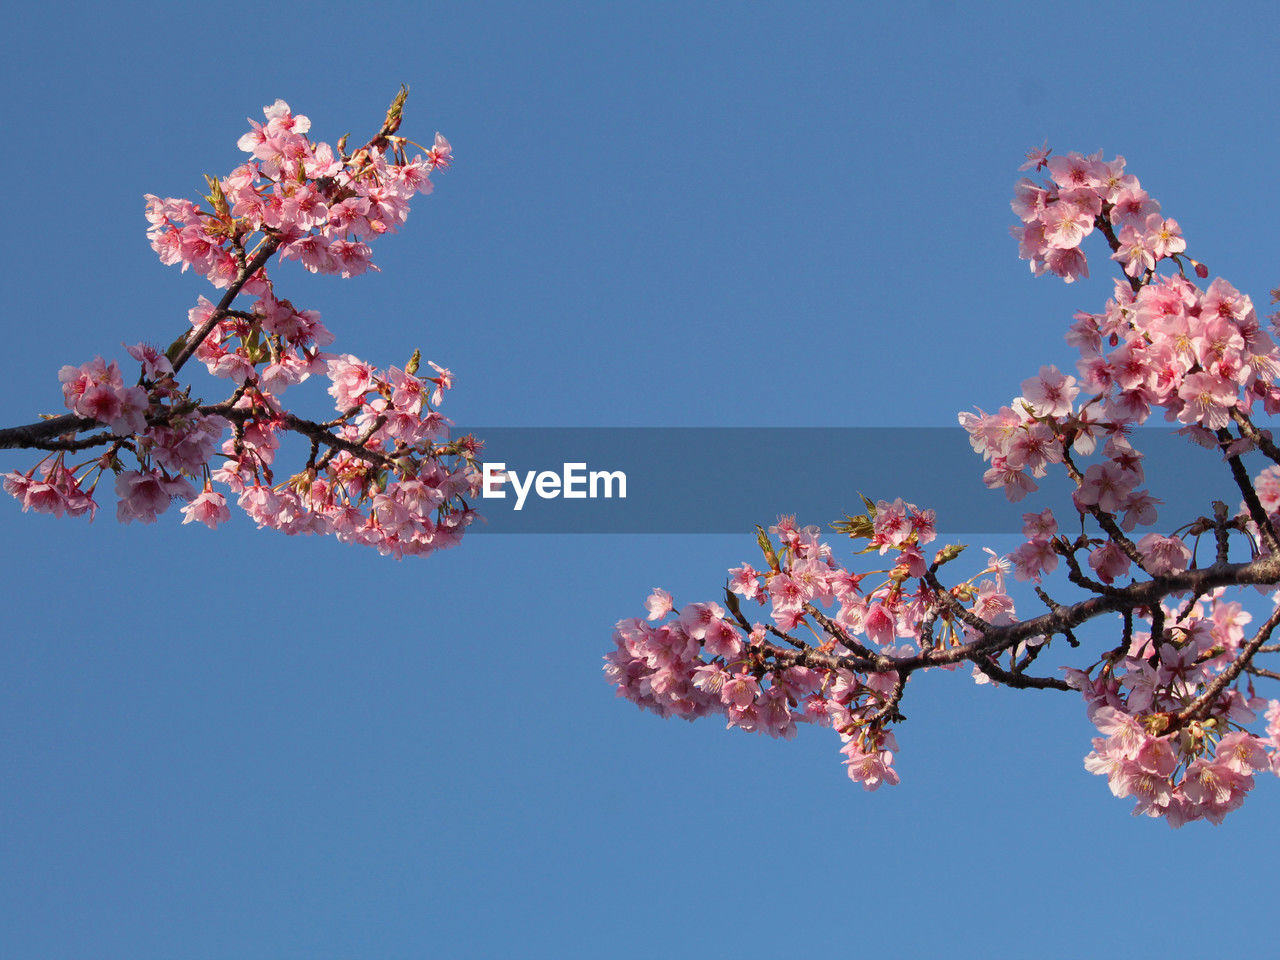 plant, flower, tree, blossom, cherry blossom, flowering plant, springtime, sky, beauty in nature, nature, fragility, pink, branch, blue, freshness, spring, clear sky, growth, petal, cherry tree, no people, outdoors, low angle view, produce, fruit tree, sunny, copy space, day, culture, tranquility